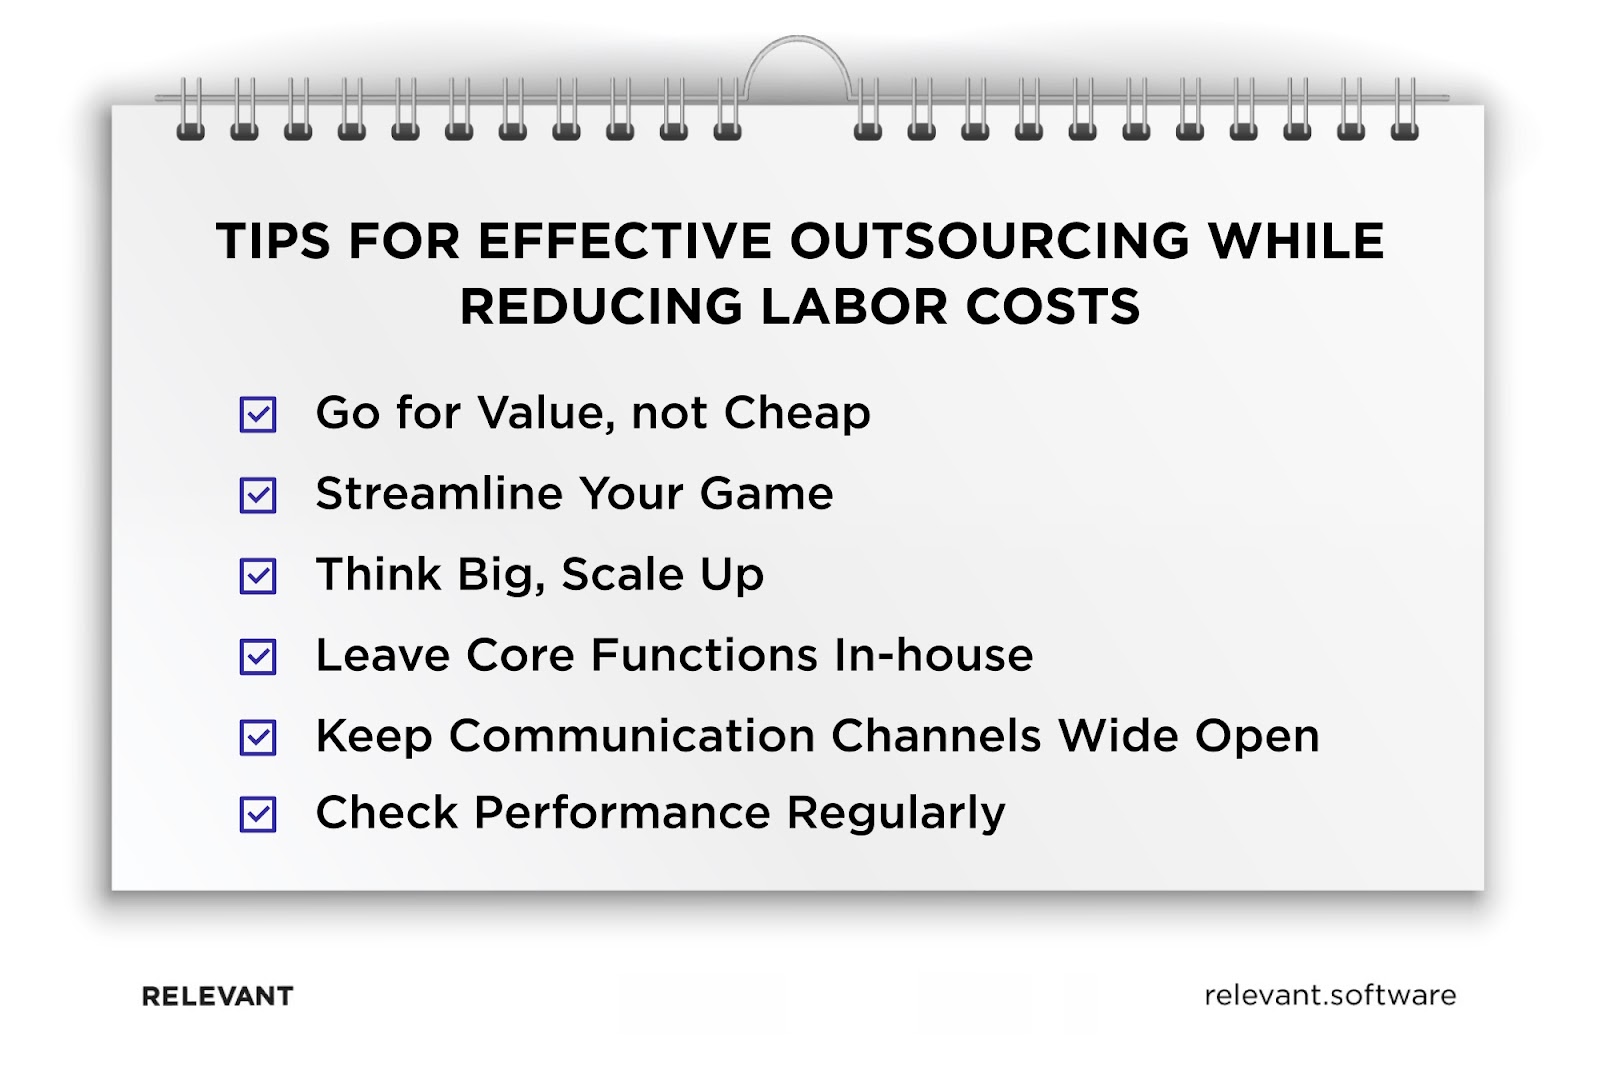 Best Practices to Reduce Labor Costs